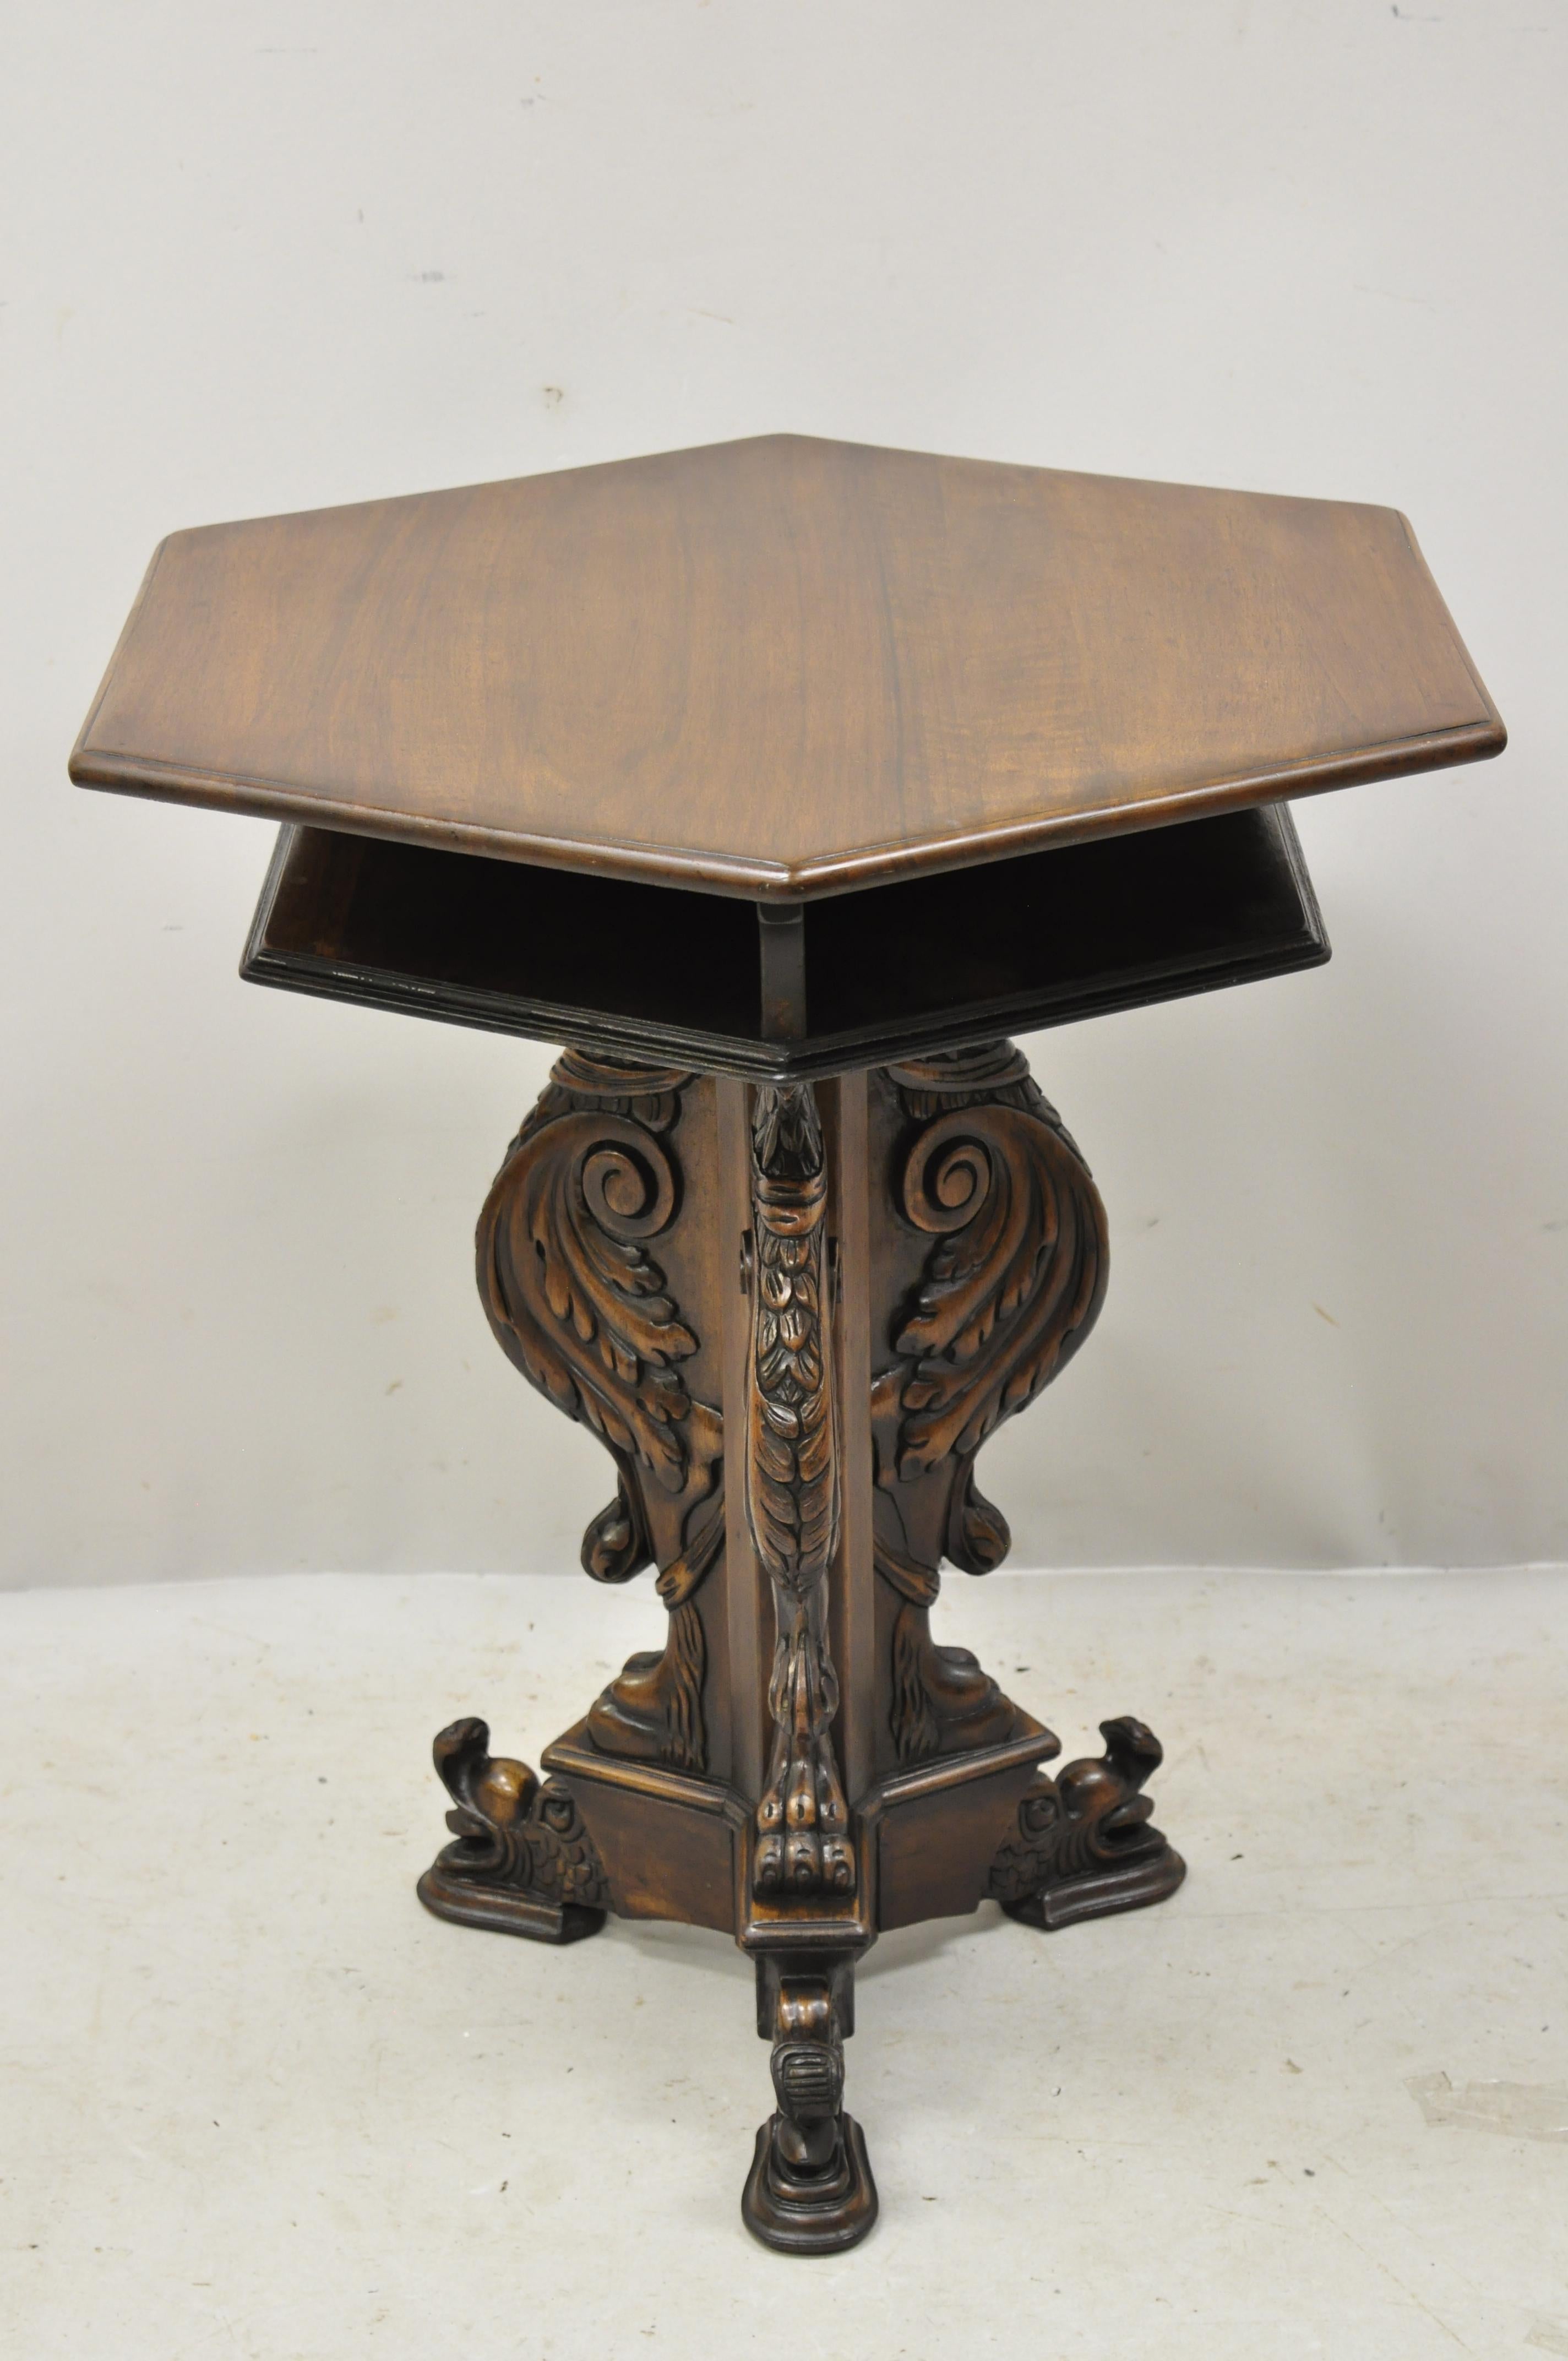 Antique Italian Renaissance figural Griffin carved walnut pedestal base occasional table. Item features figural carved griffin pedestal base, 3 storage cubbies, solid wood construction, beautiful wood grain, circa early 1900s. Measurements: 28.5